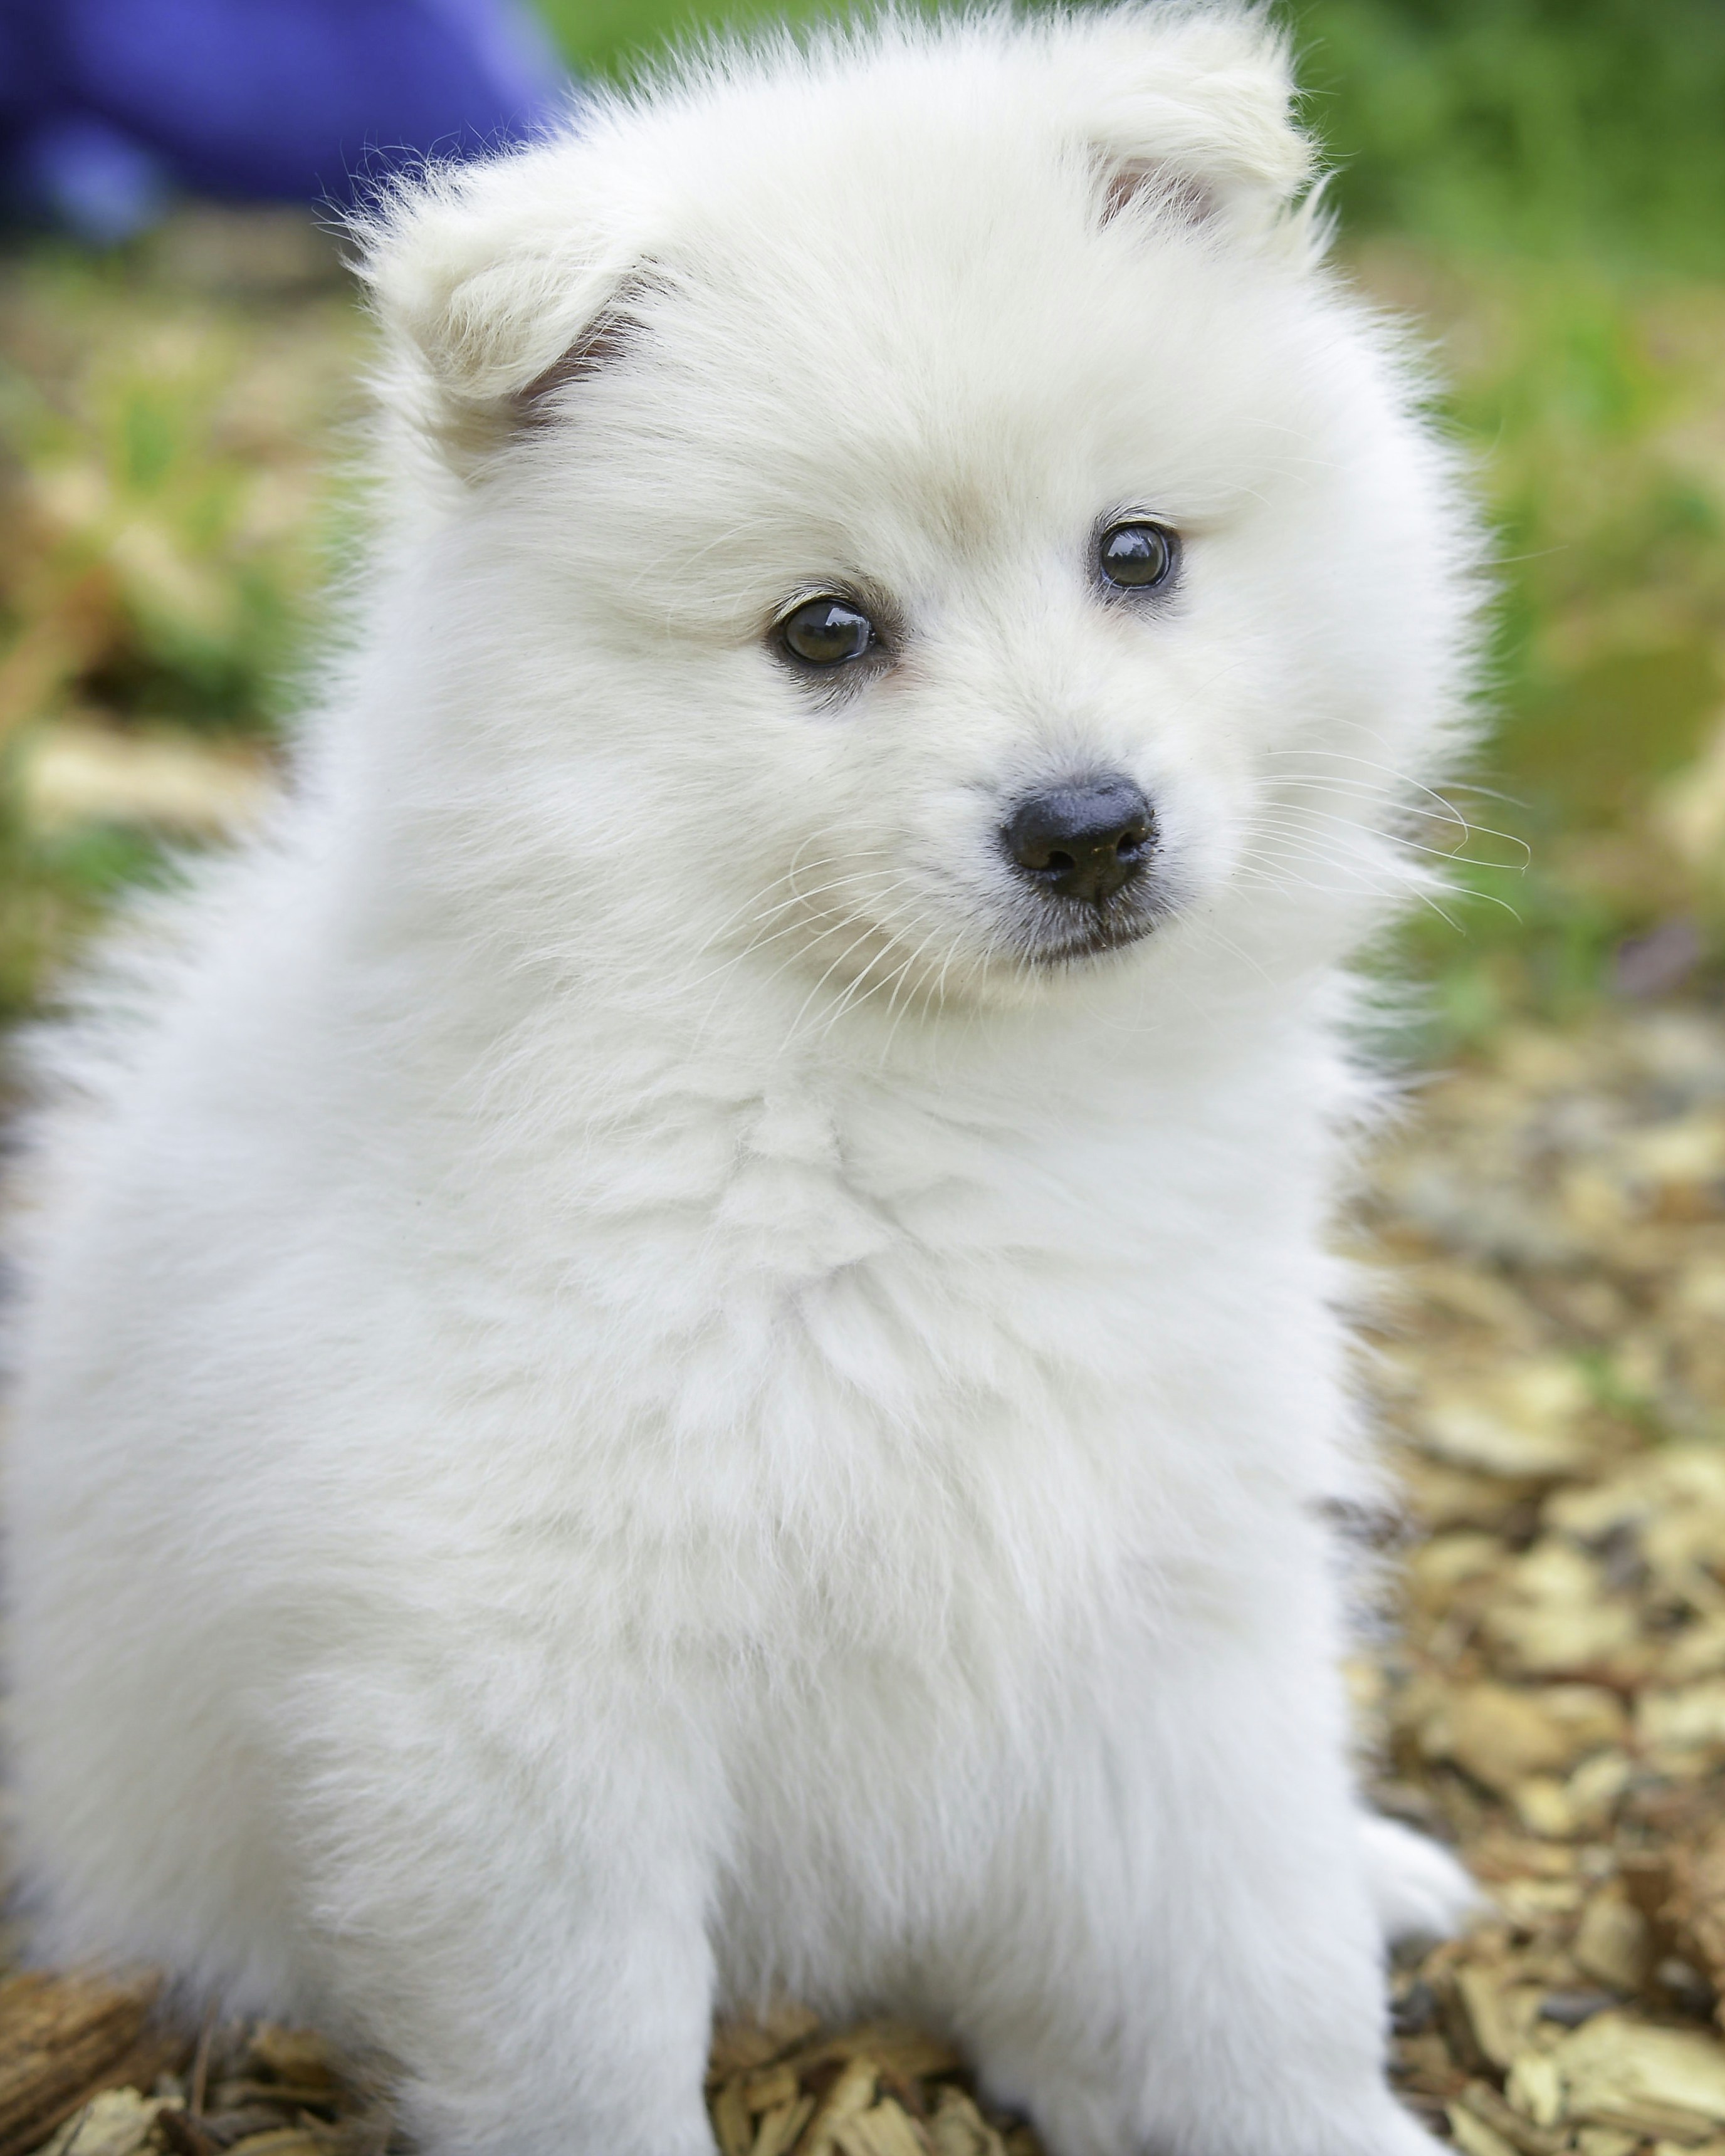 White American Eskimo puppy dog named Rambo. Adorable brown eyes and floppy ears. Soft fluffy fur.